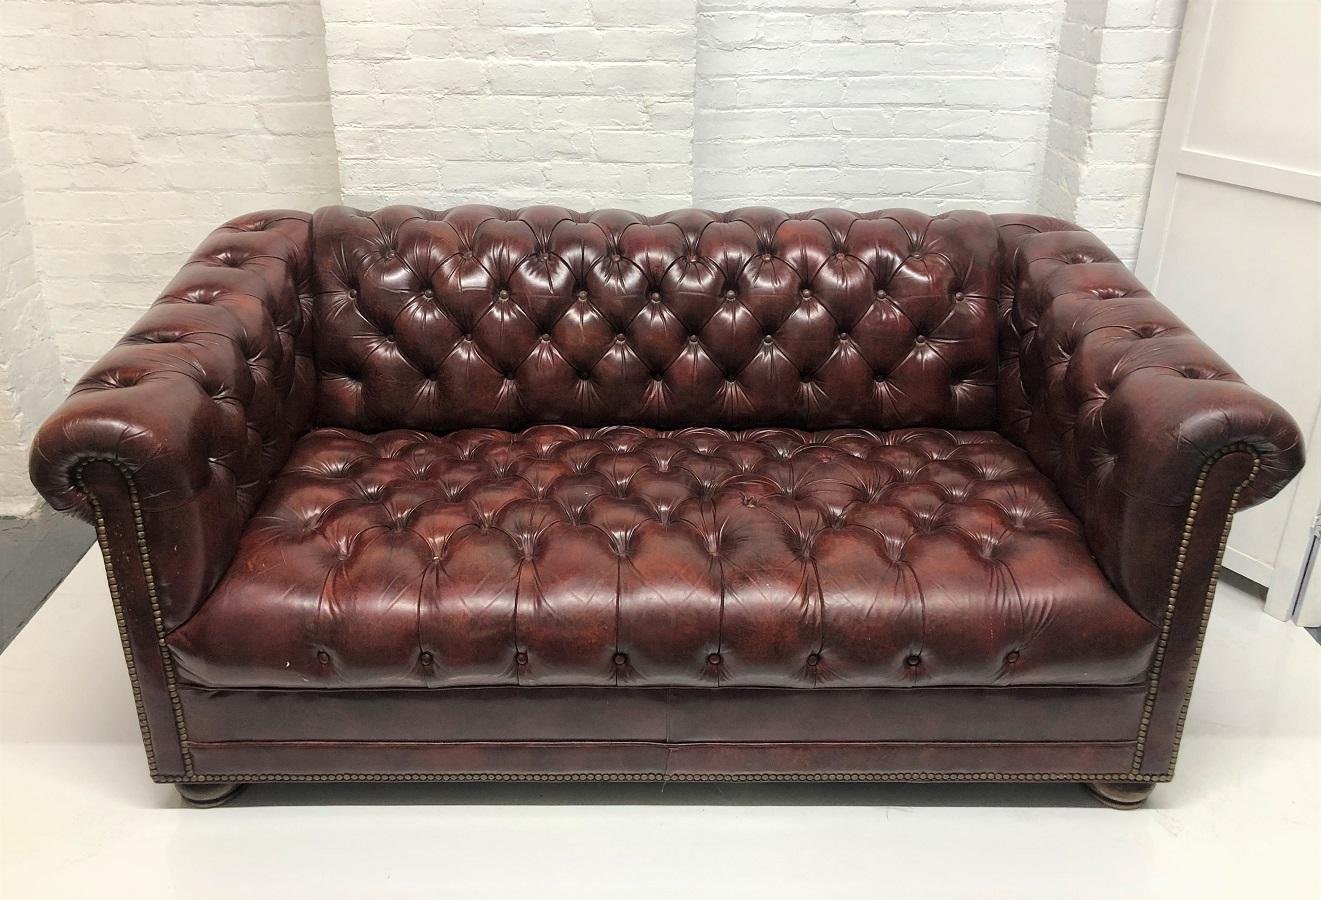 Leather Chesterfield style loveseat / sofa. The sofa is burgundy with wood bun feet.